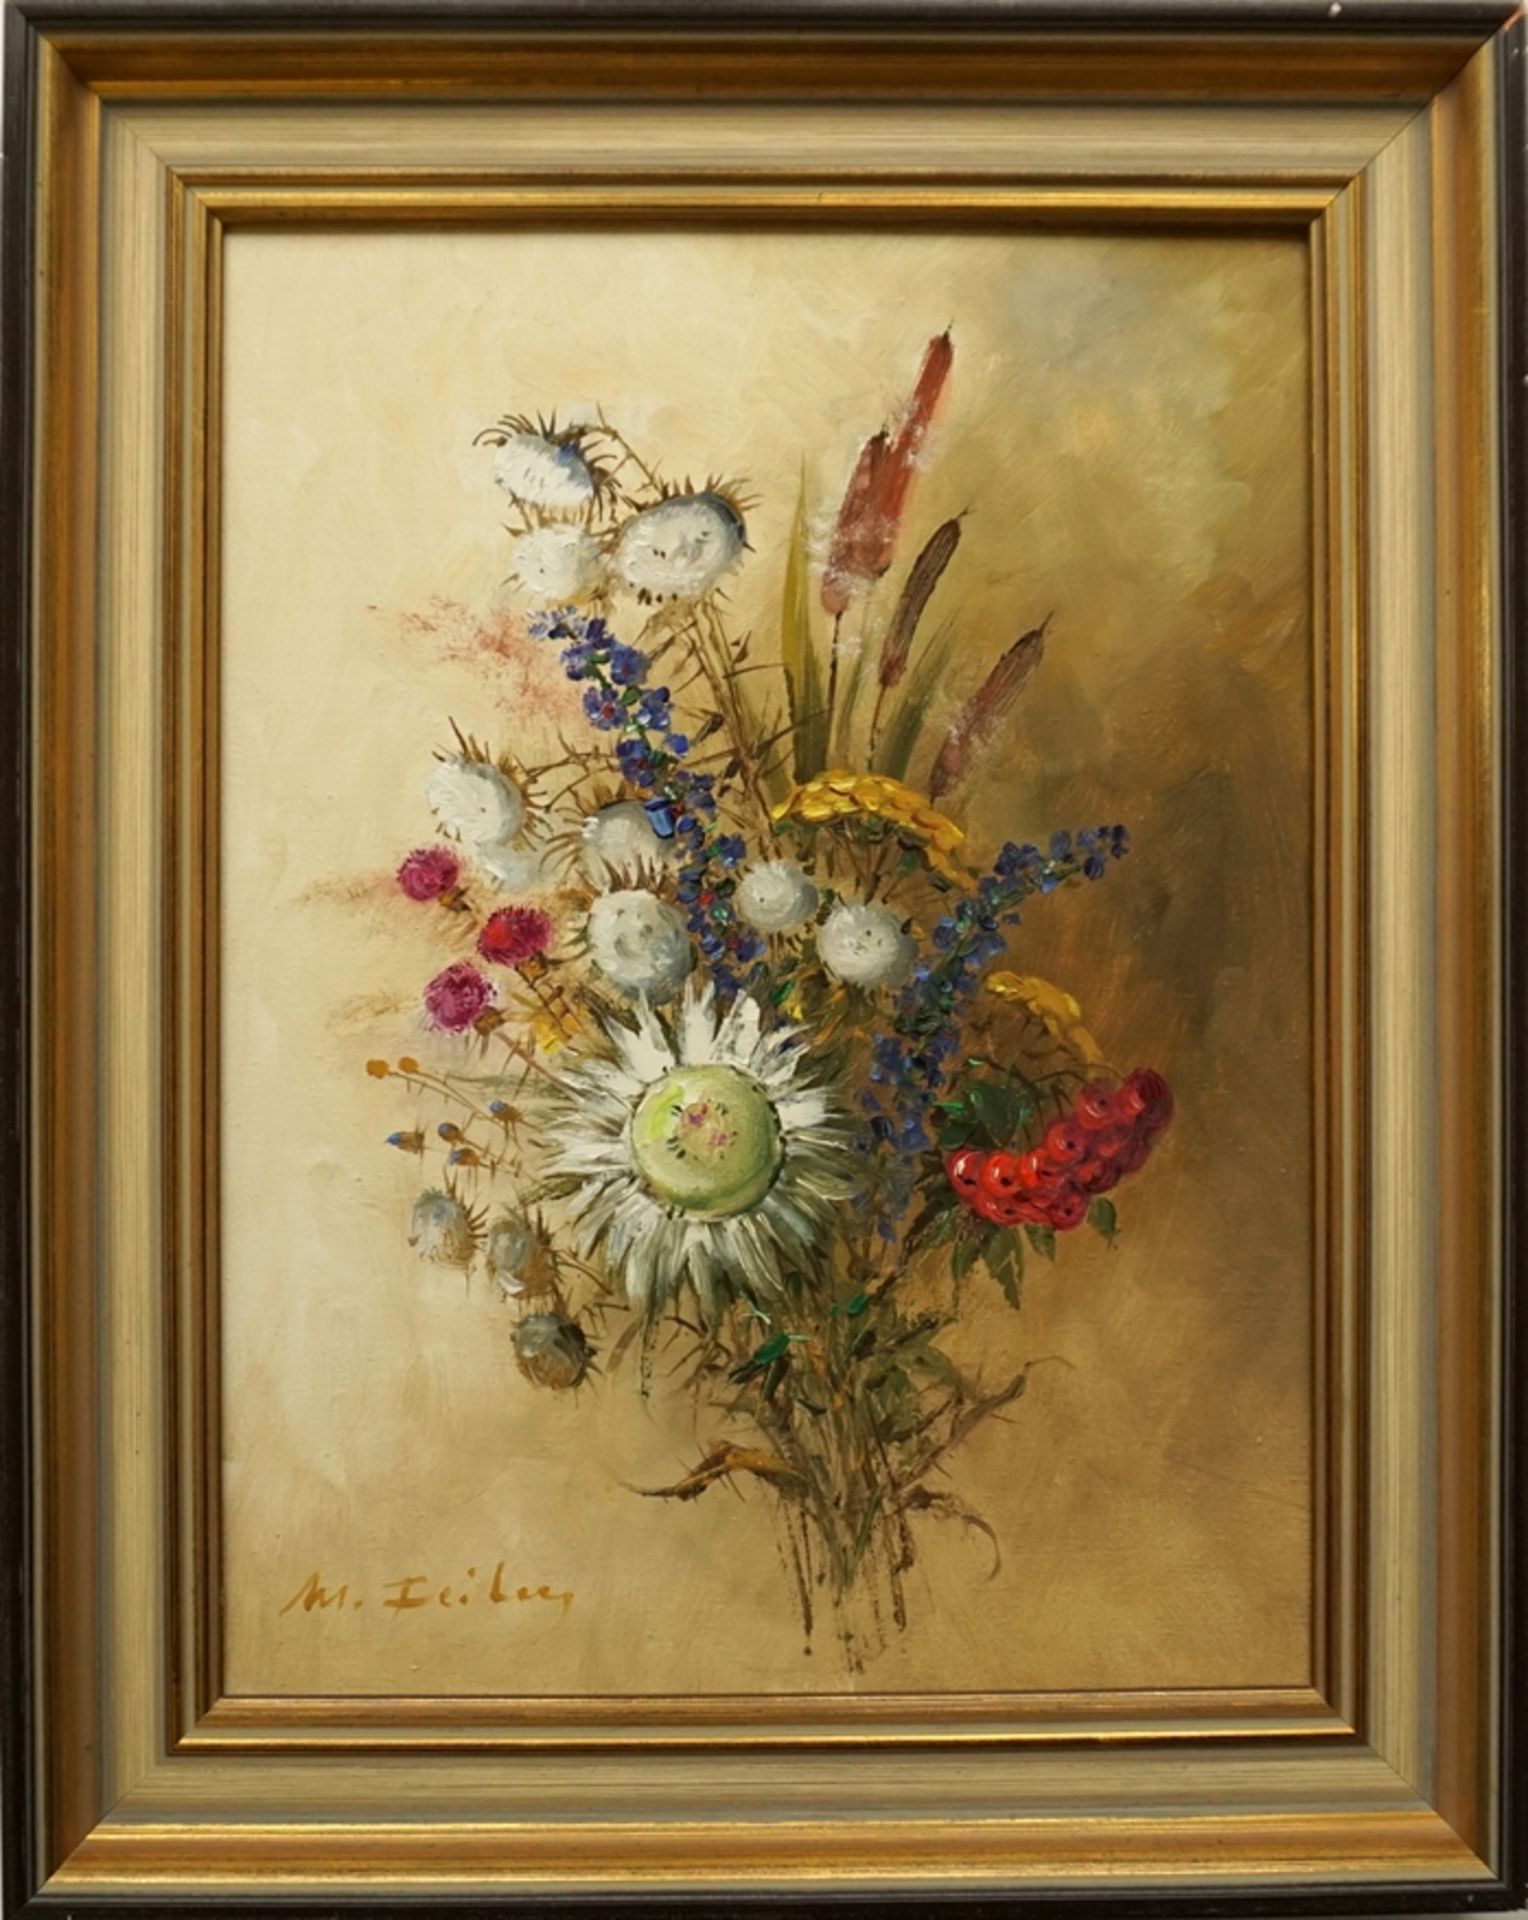 Manfred Feiler (*1925, Plauen - 2020, ibid.), "Bouquet of field flowers with silver thistles", oil/